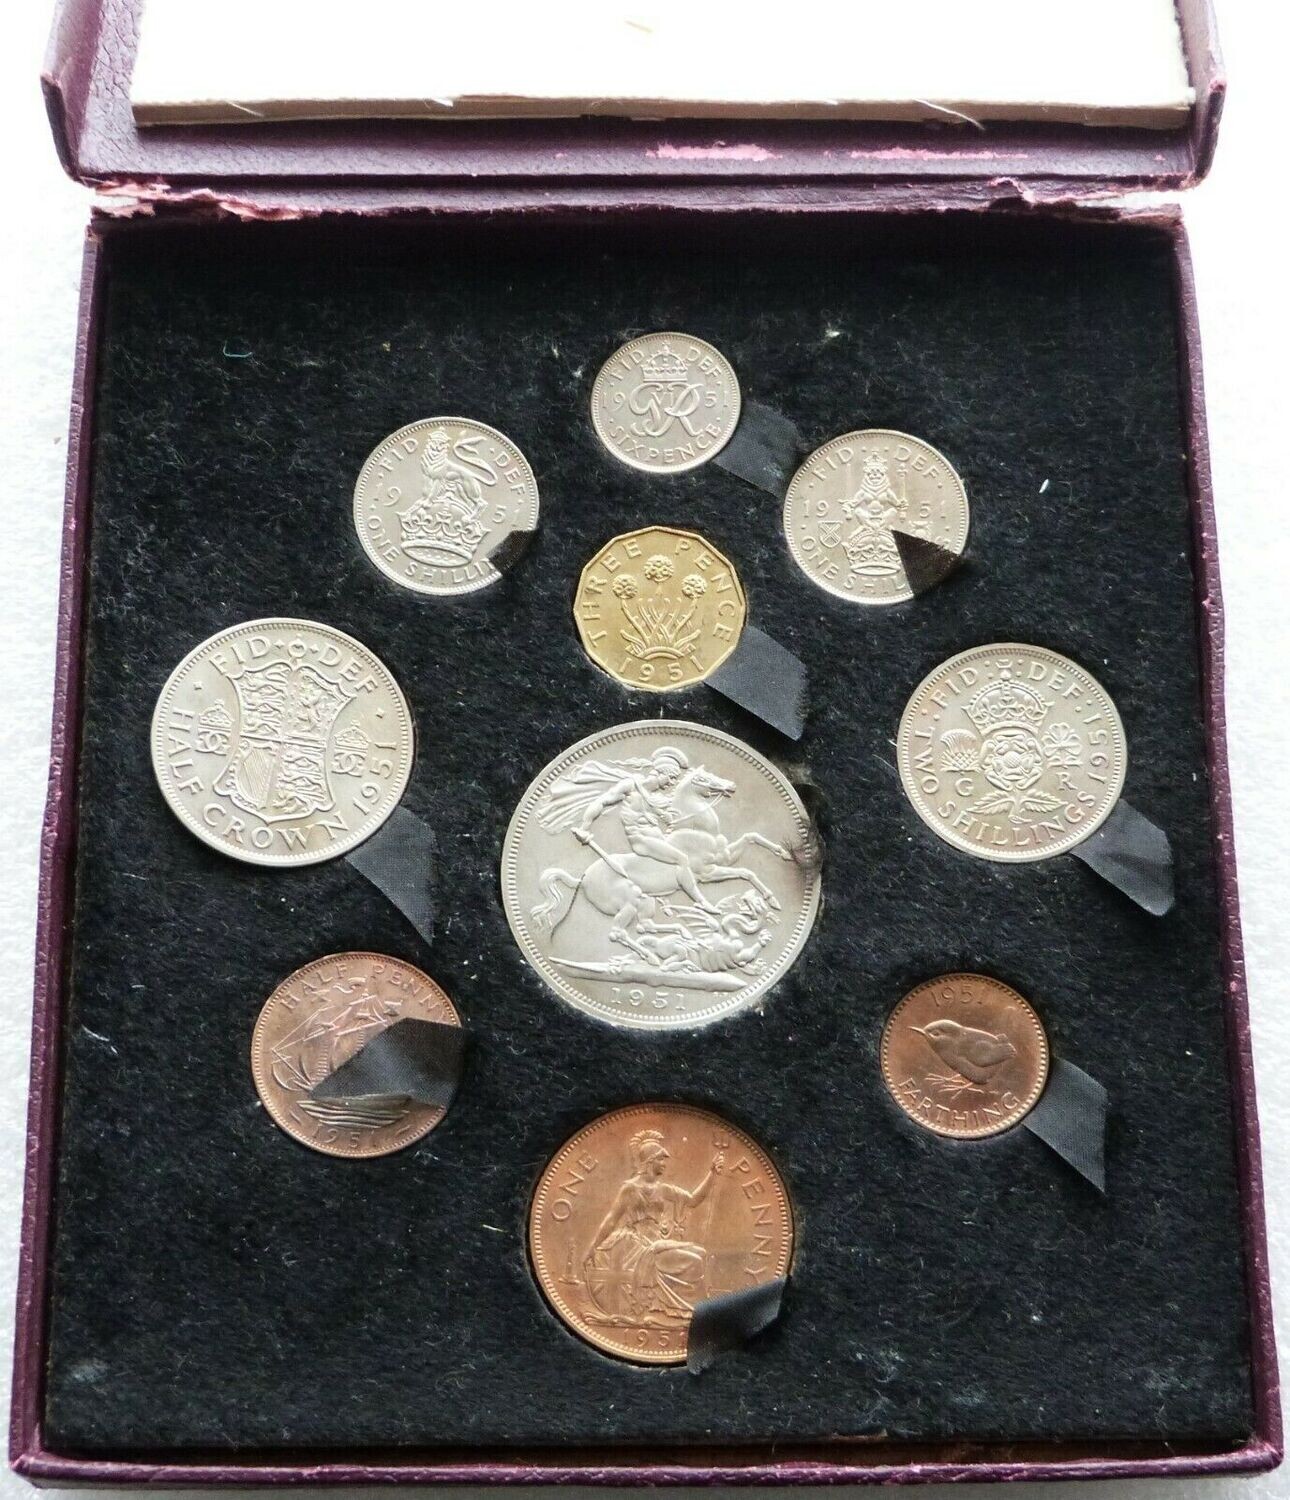 1951 George VI Festival of Britain Proof 10 Coin Set - Crown to Farthing